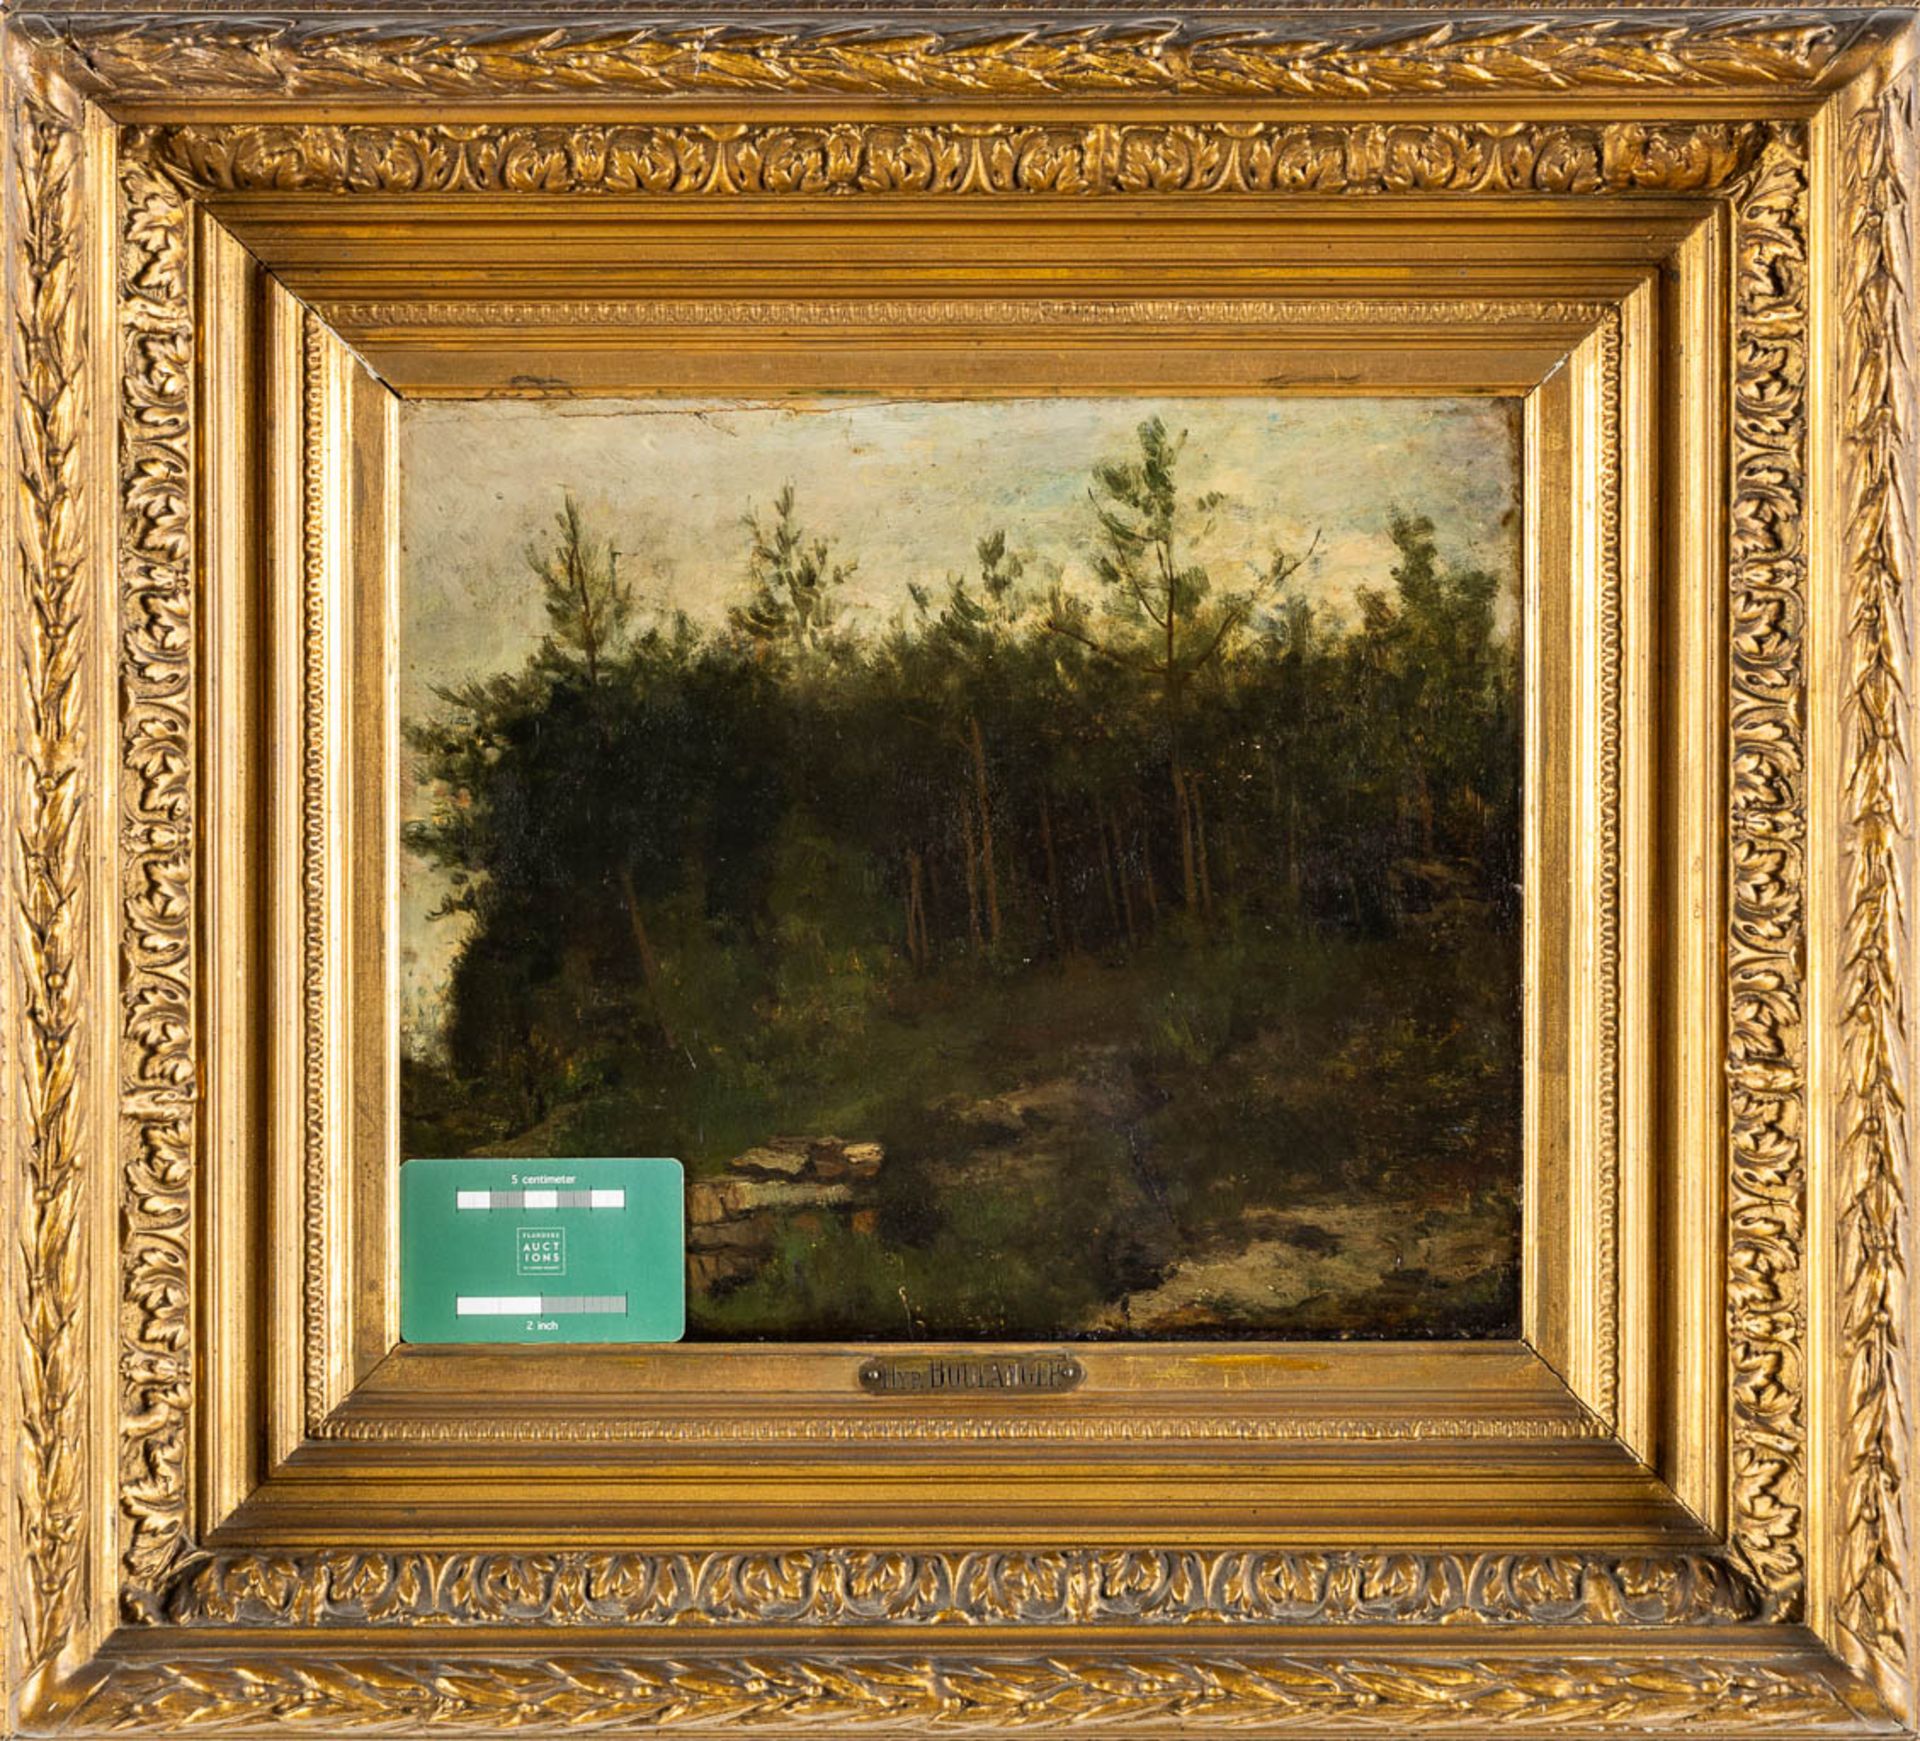 Hippolyte BOULENGER (1837-1874) 'Forest View' oil on canvas. (W:35 x H:30 cm) - Image 2 of 7